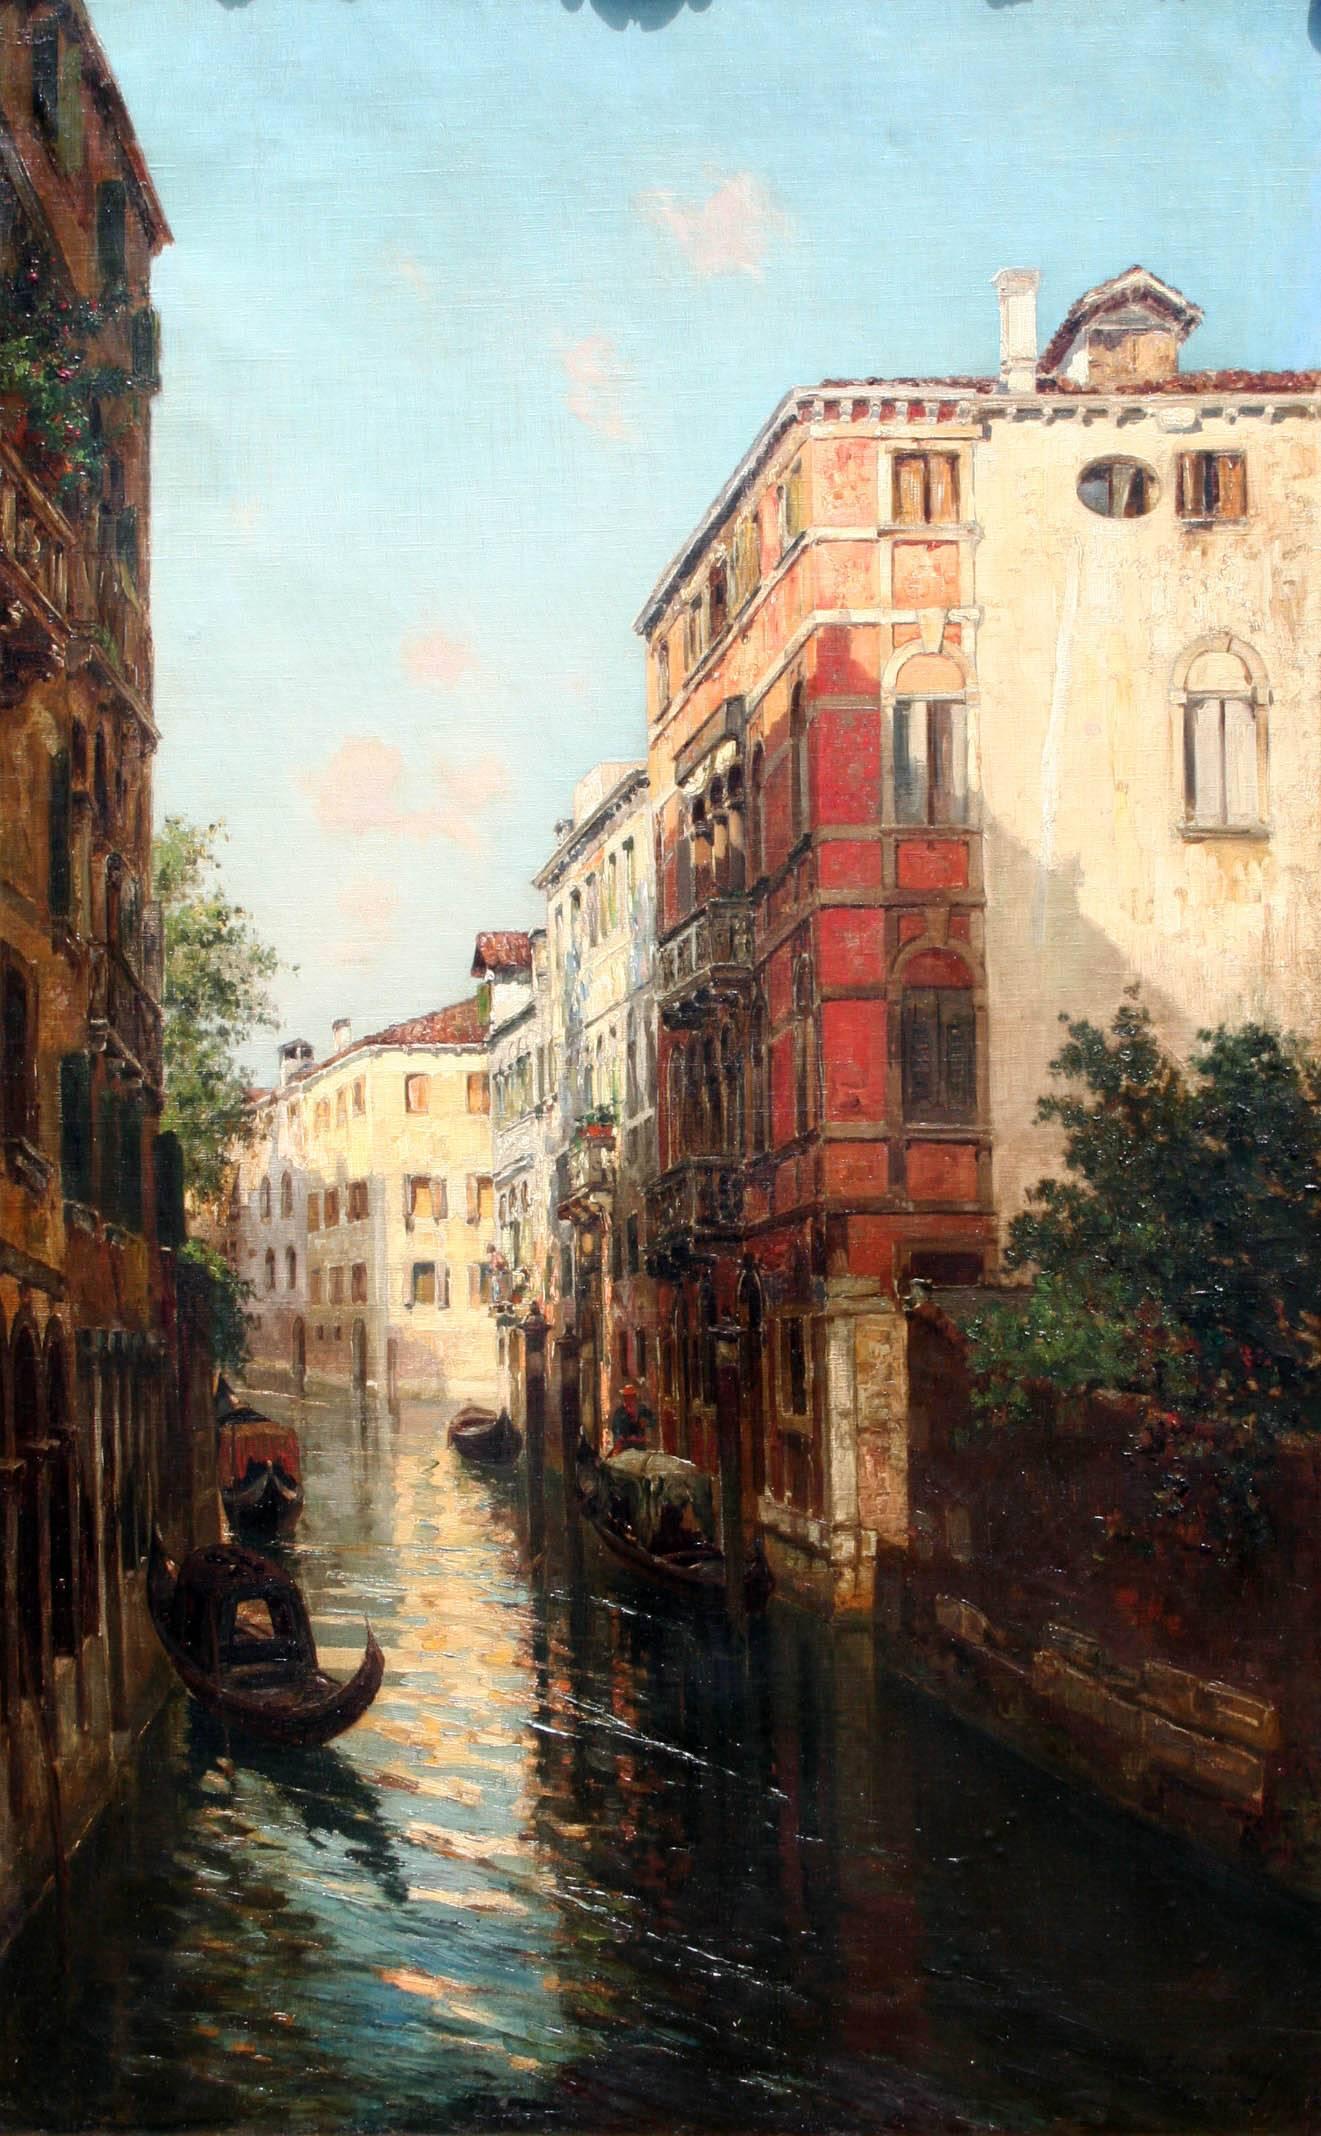 Bernardo Hay (British/Italian 1864-1931).
Venetian canal in sunlight and shadow.
Oil-on-canvas, signed lower right and dated “1899.”

Painting size: 37.75” x 23.5”.
Frame size: 47.5” x 33”.

Although usually listed as a British artist, Hay